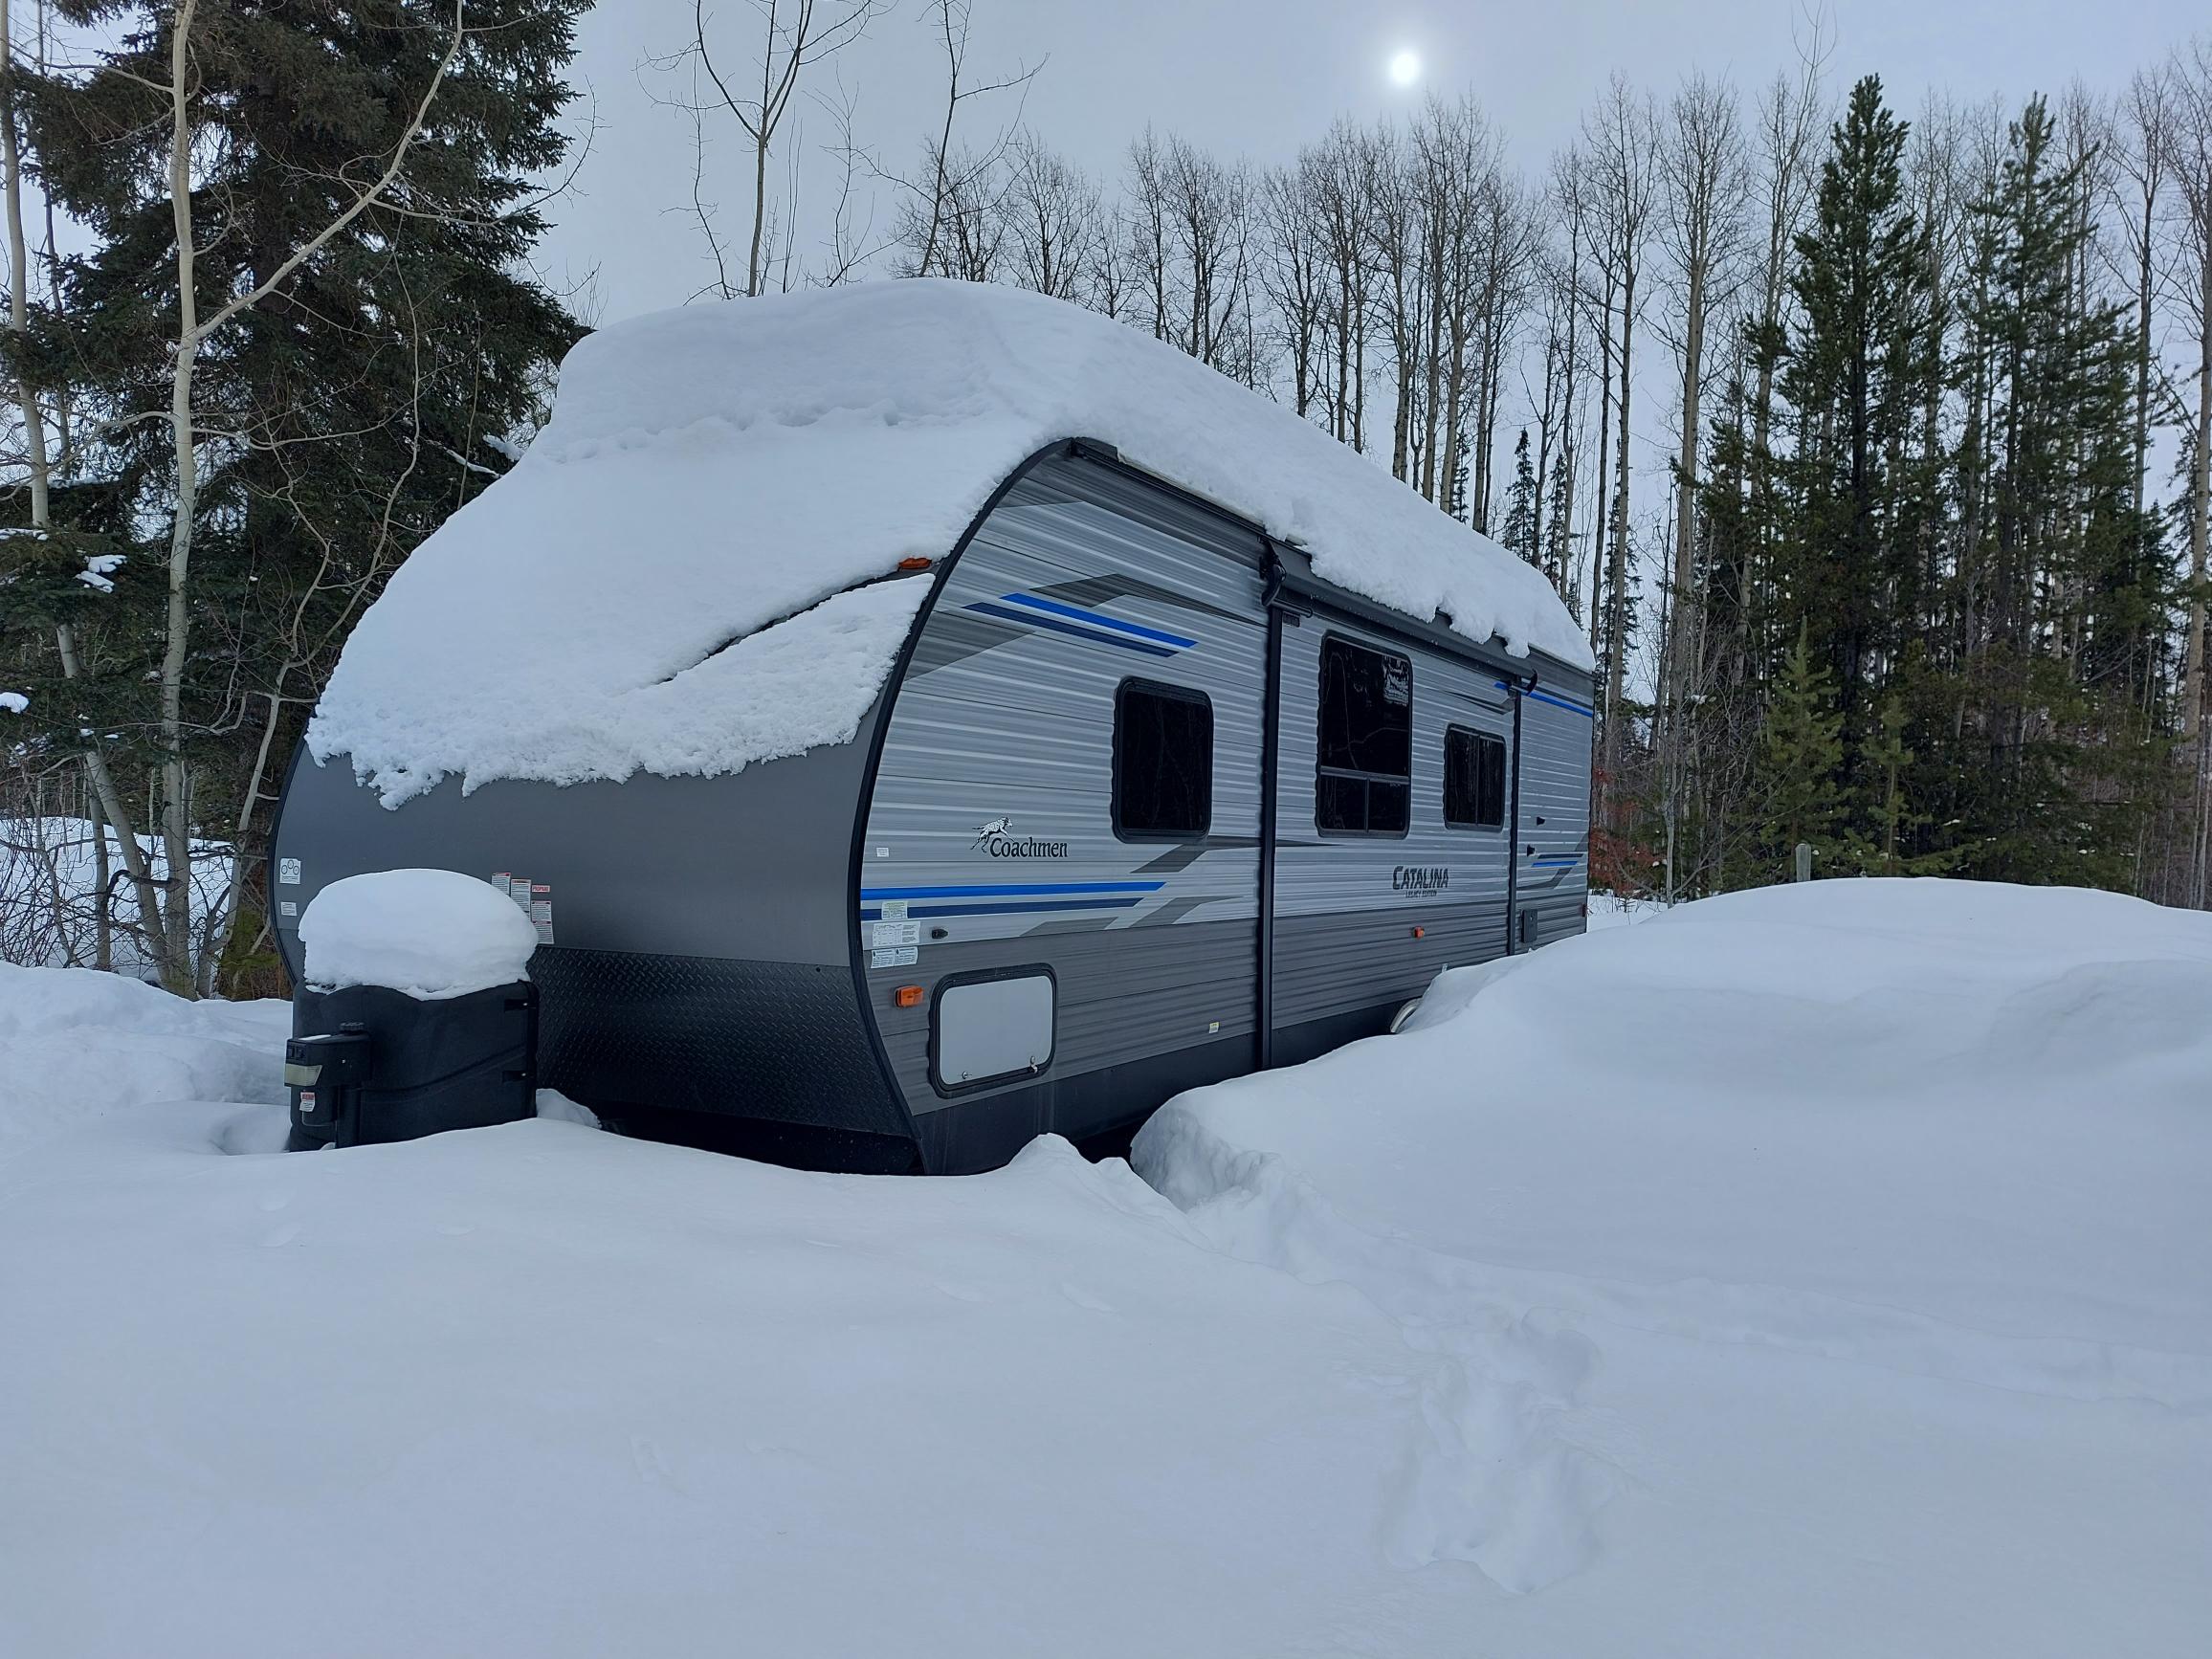 2019 Coachman Catalina 273BHSKS #B-PG-0749 Located in Prince George